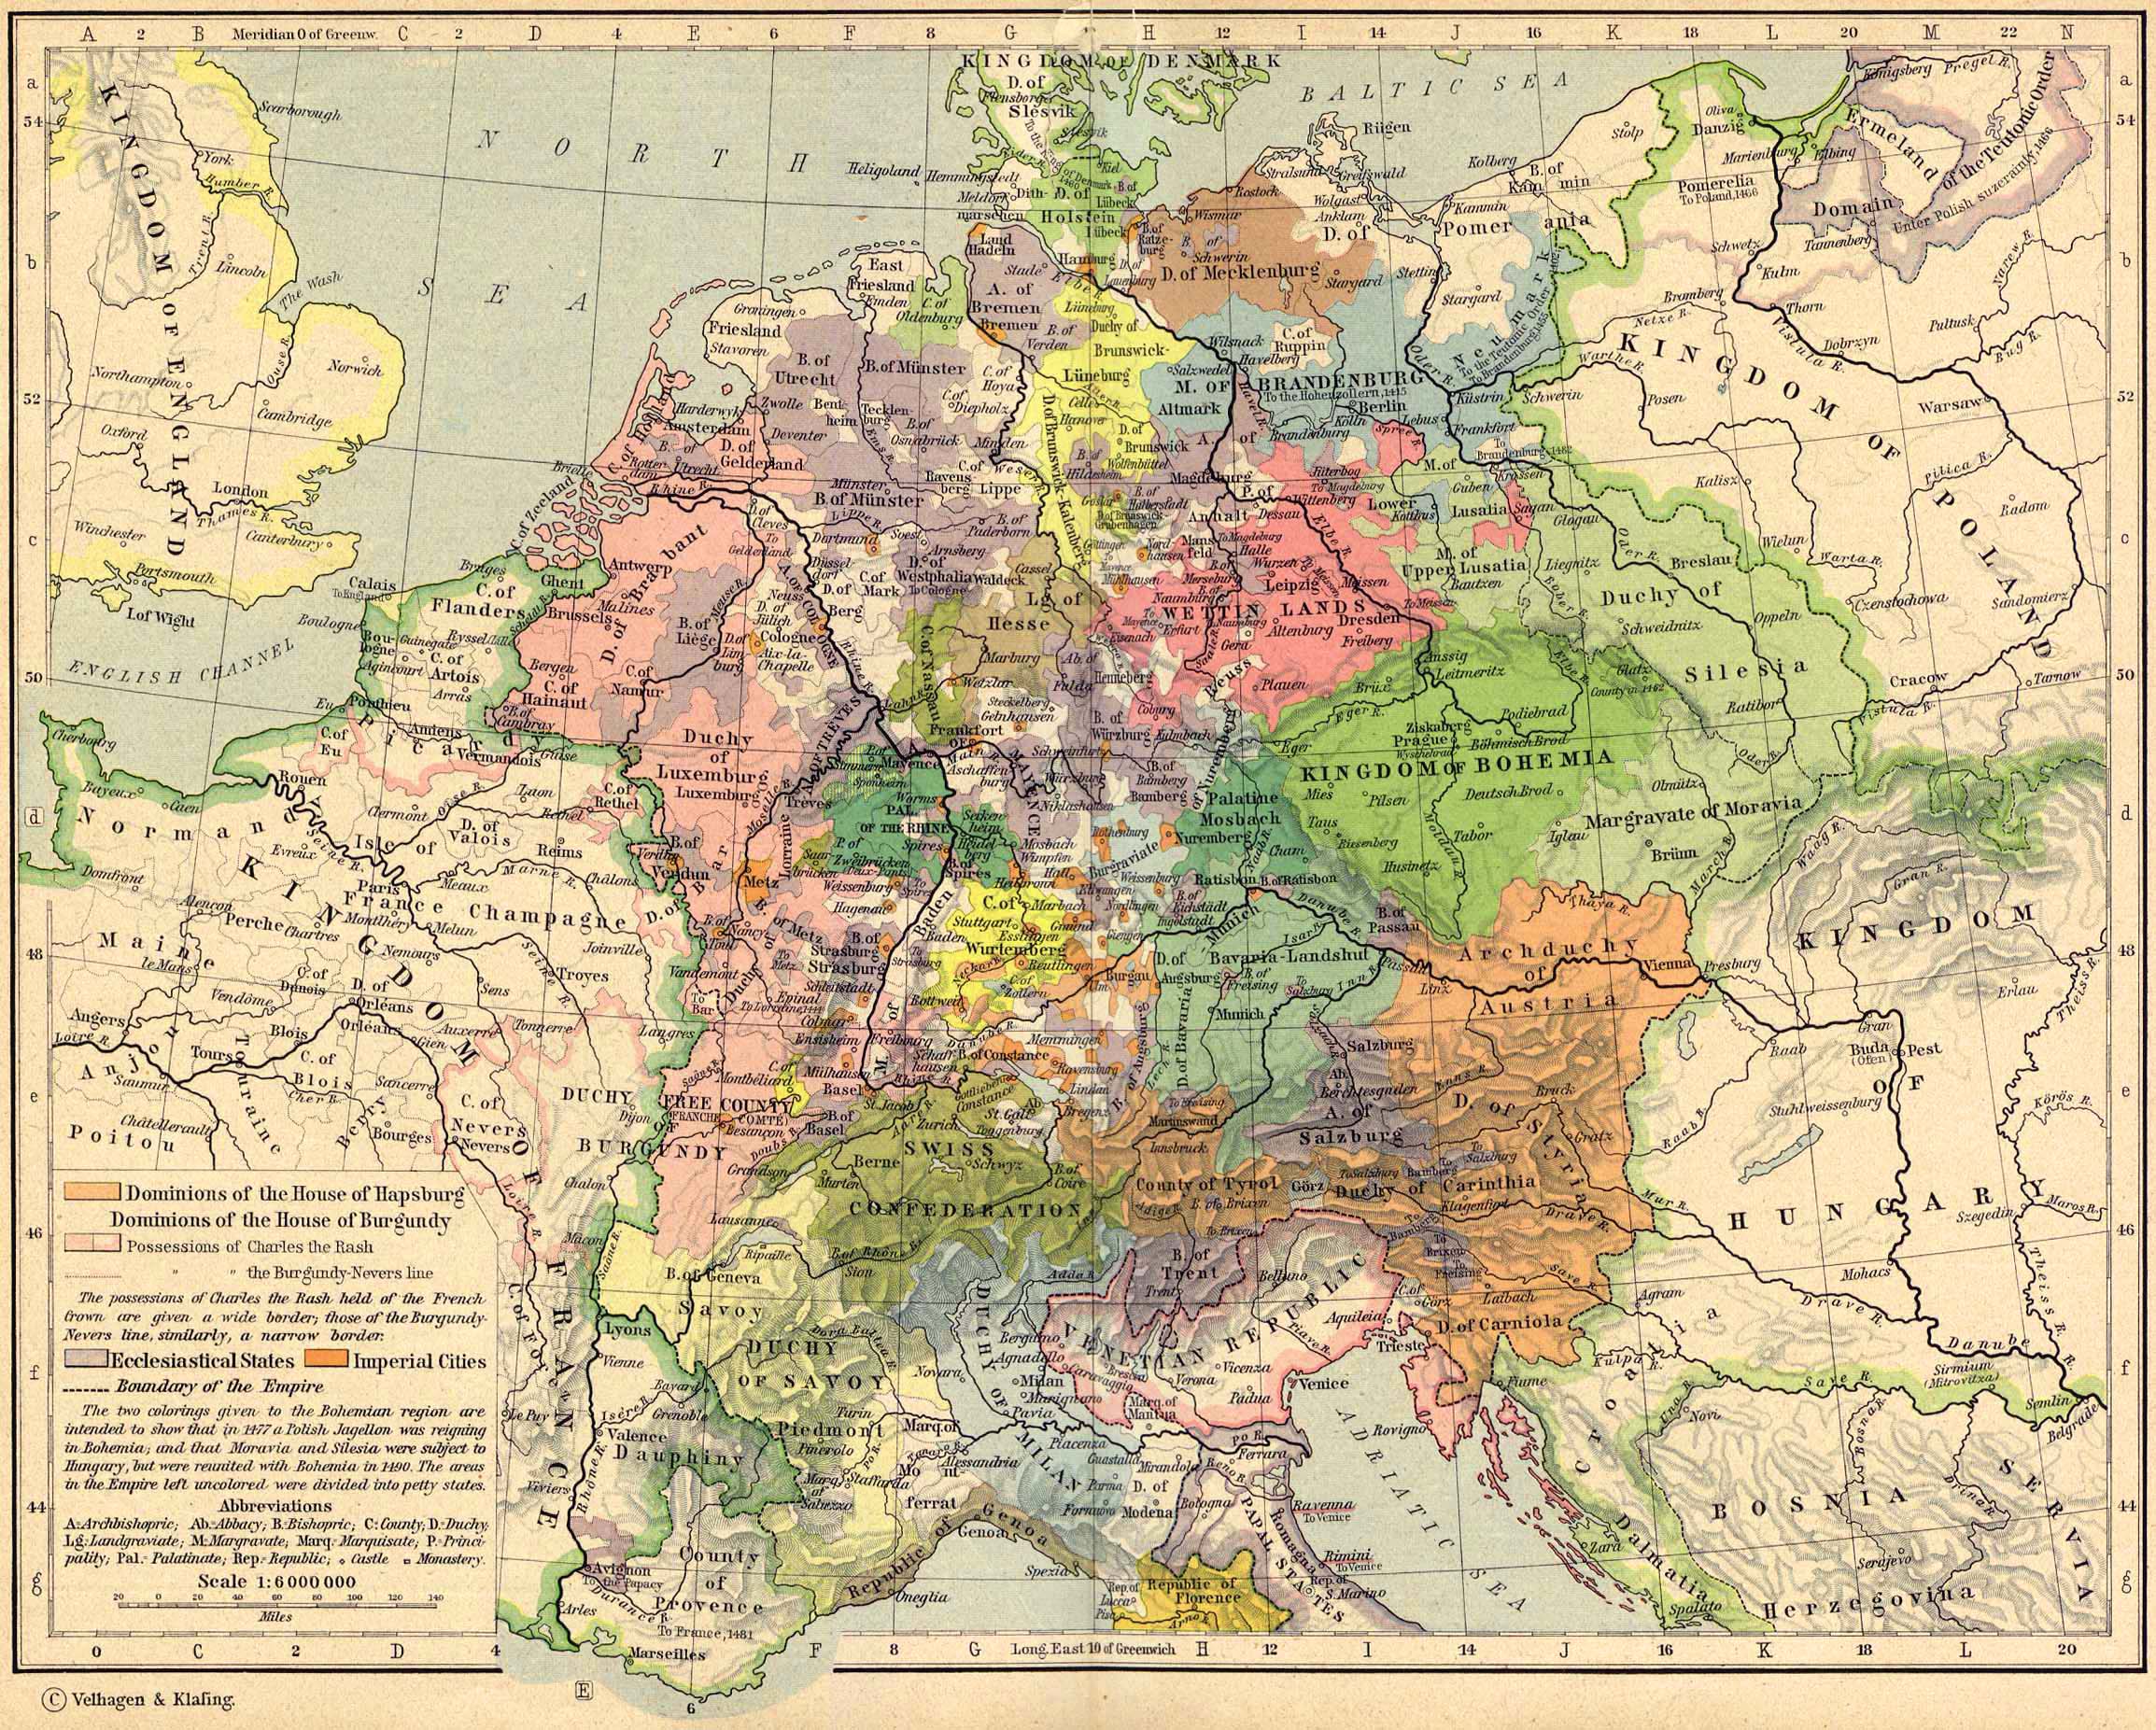 Map of Central Europe about 1477